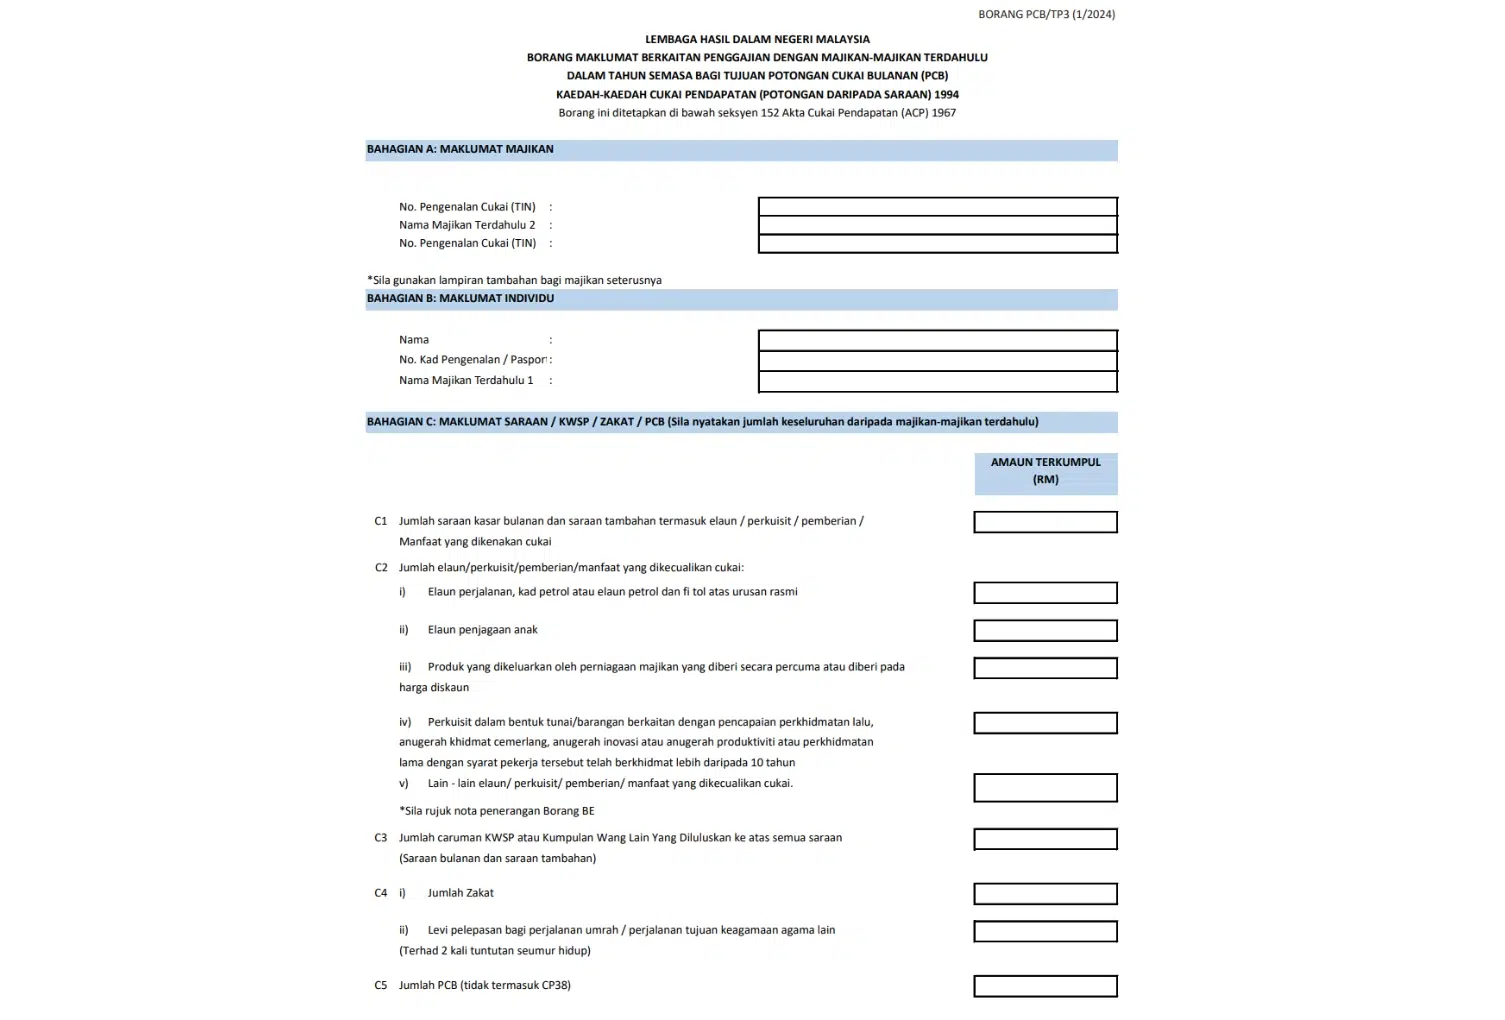 An overview of the TP3 Form.